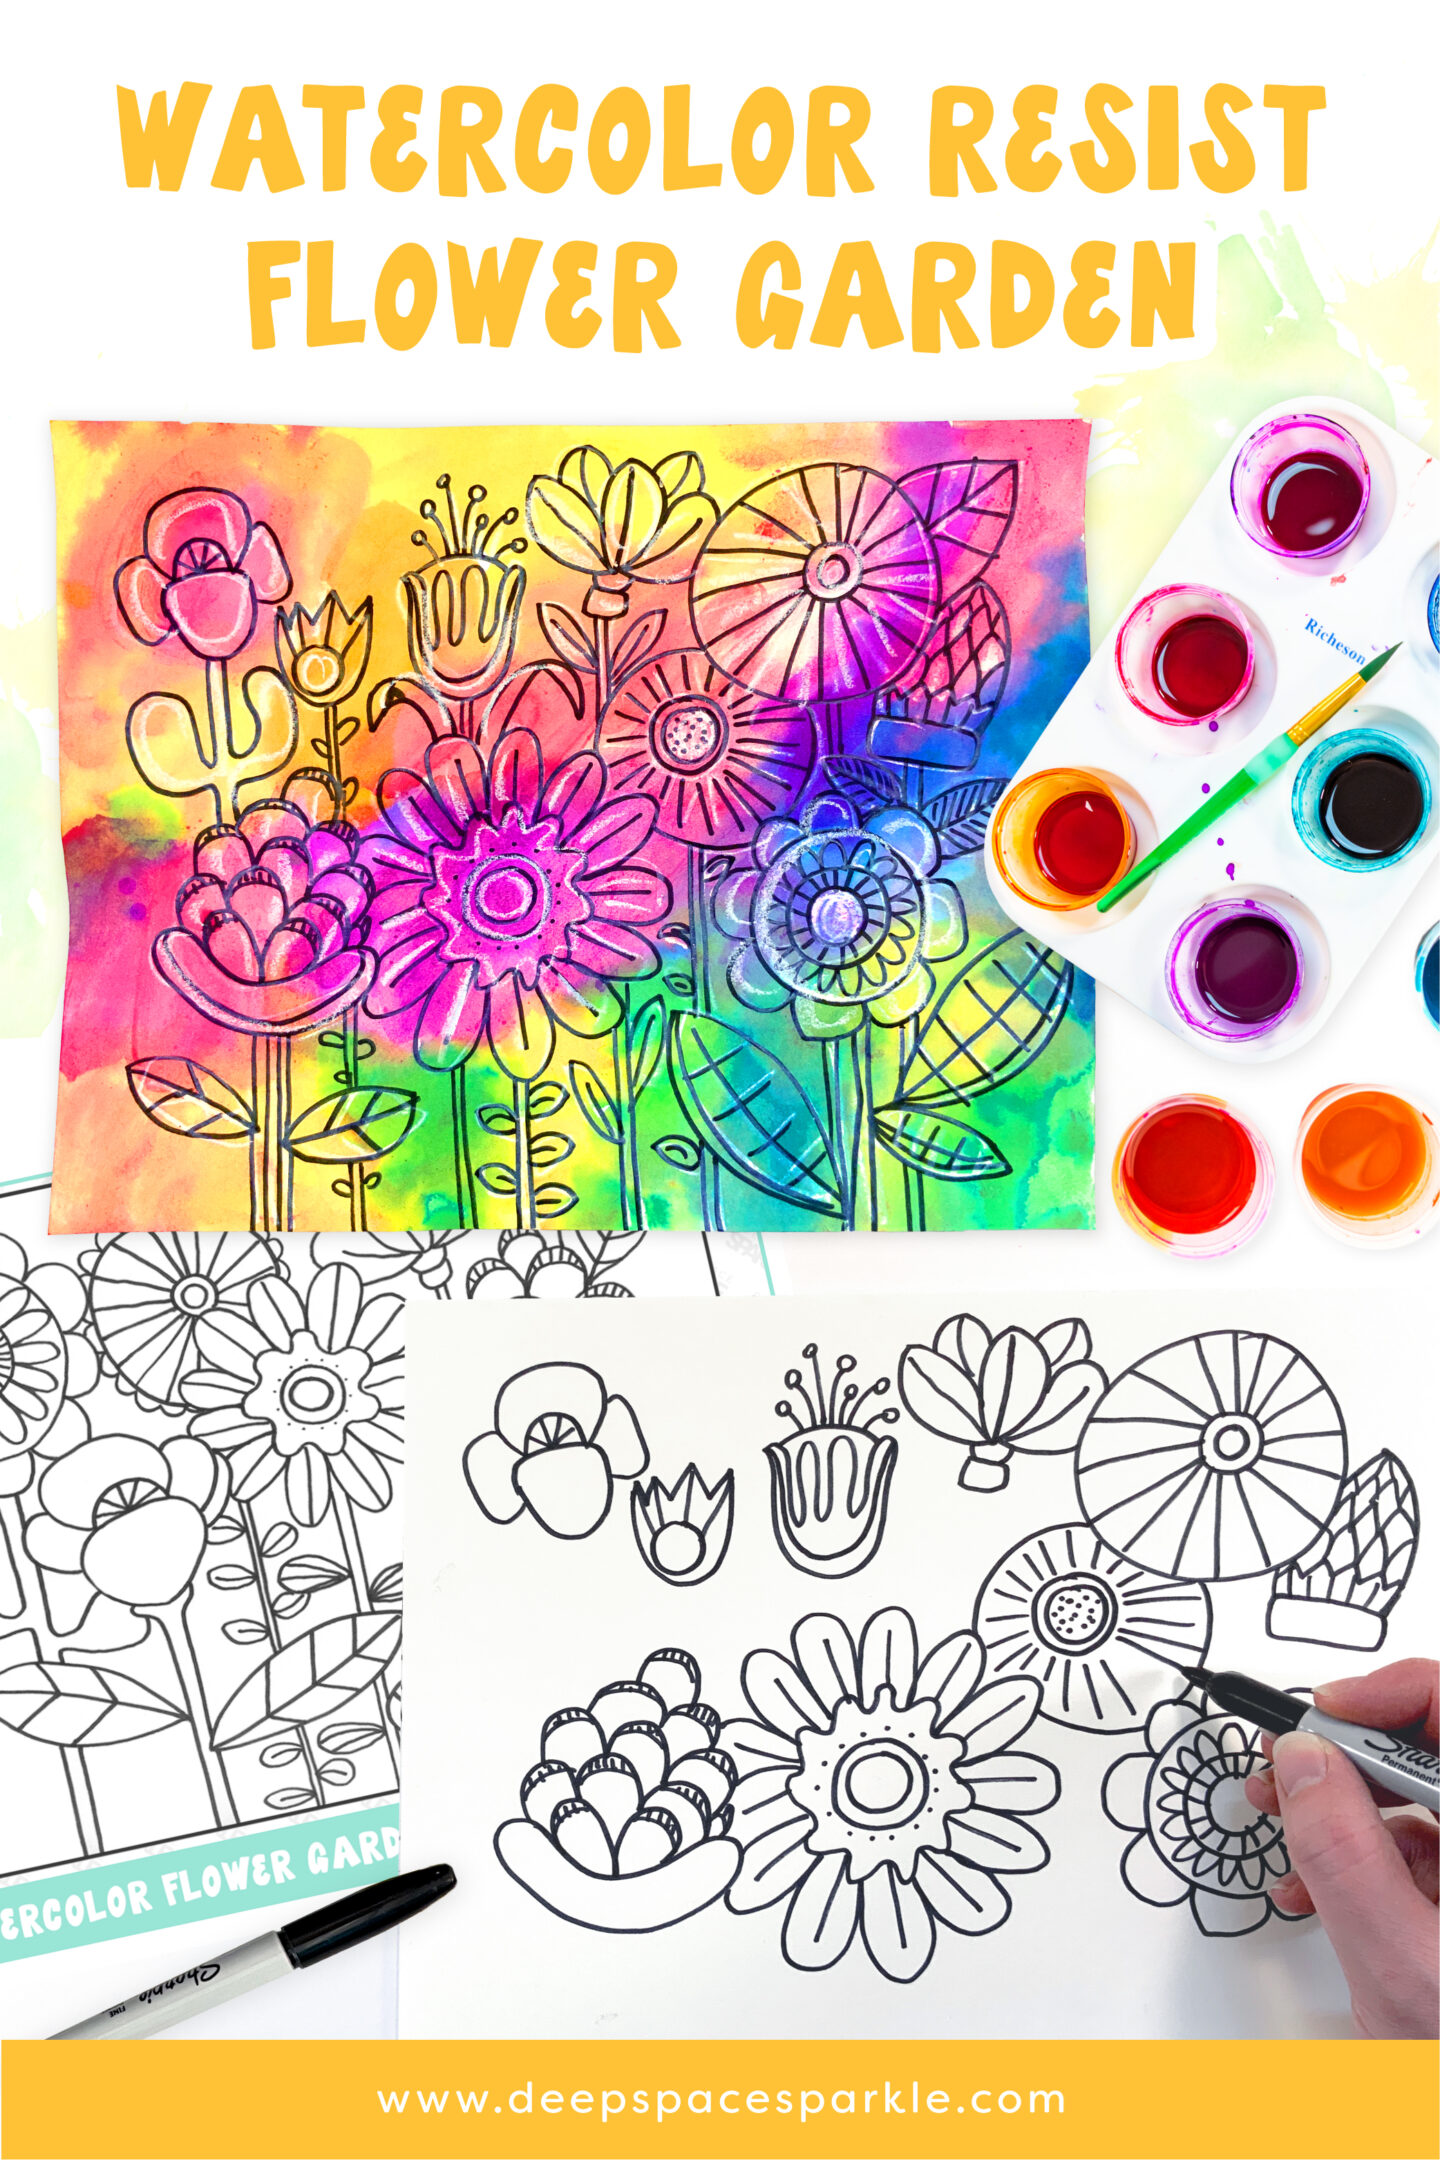 Watercolor Flower Garden Drawing Spring or Summer Art Lesson for Kids using Watercolor Resist Method